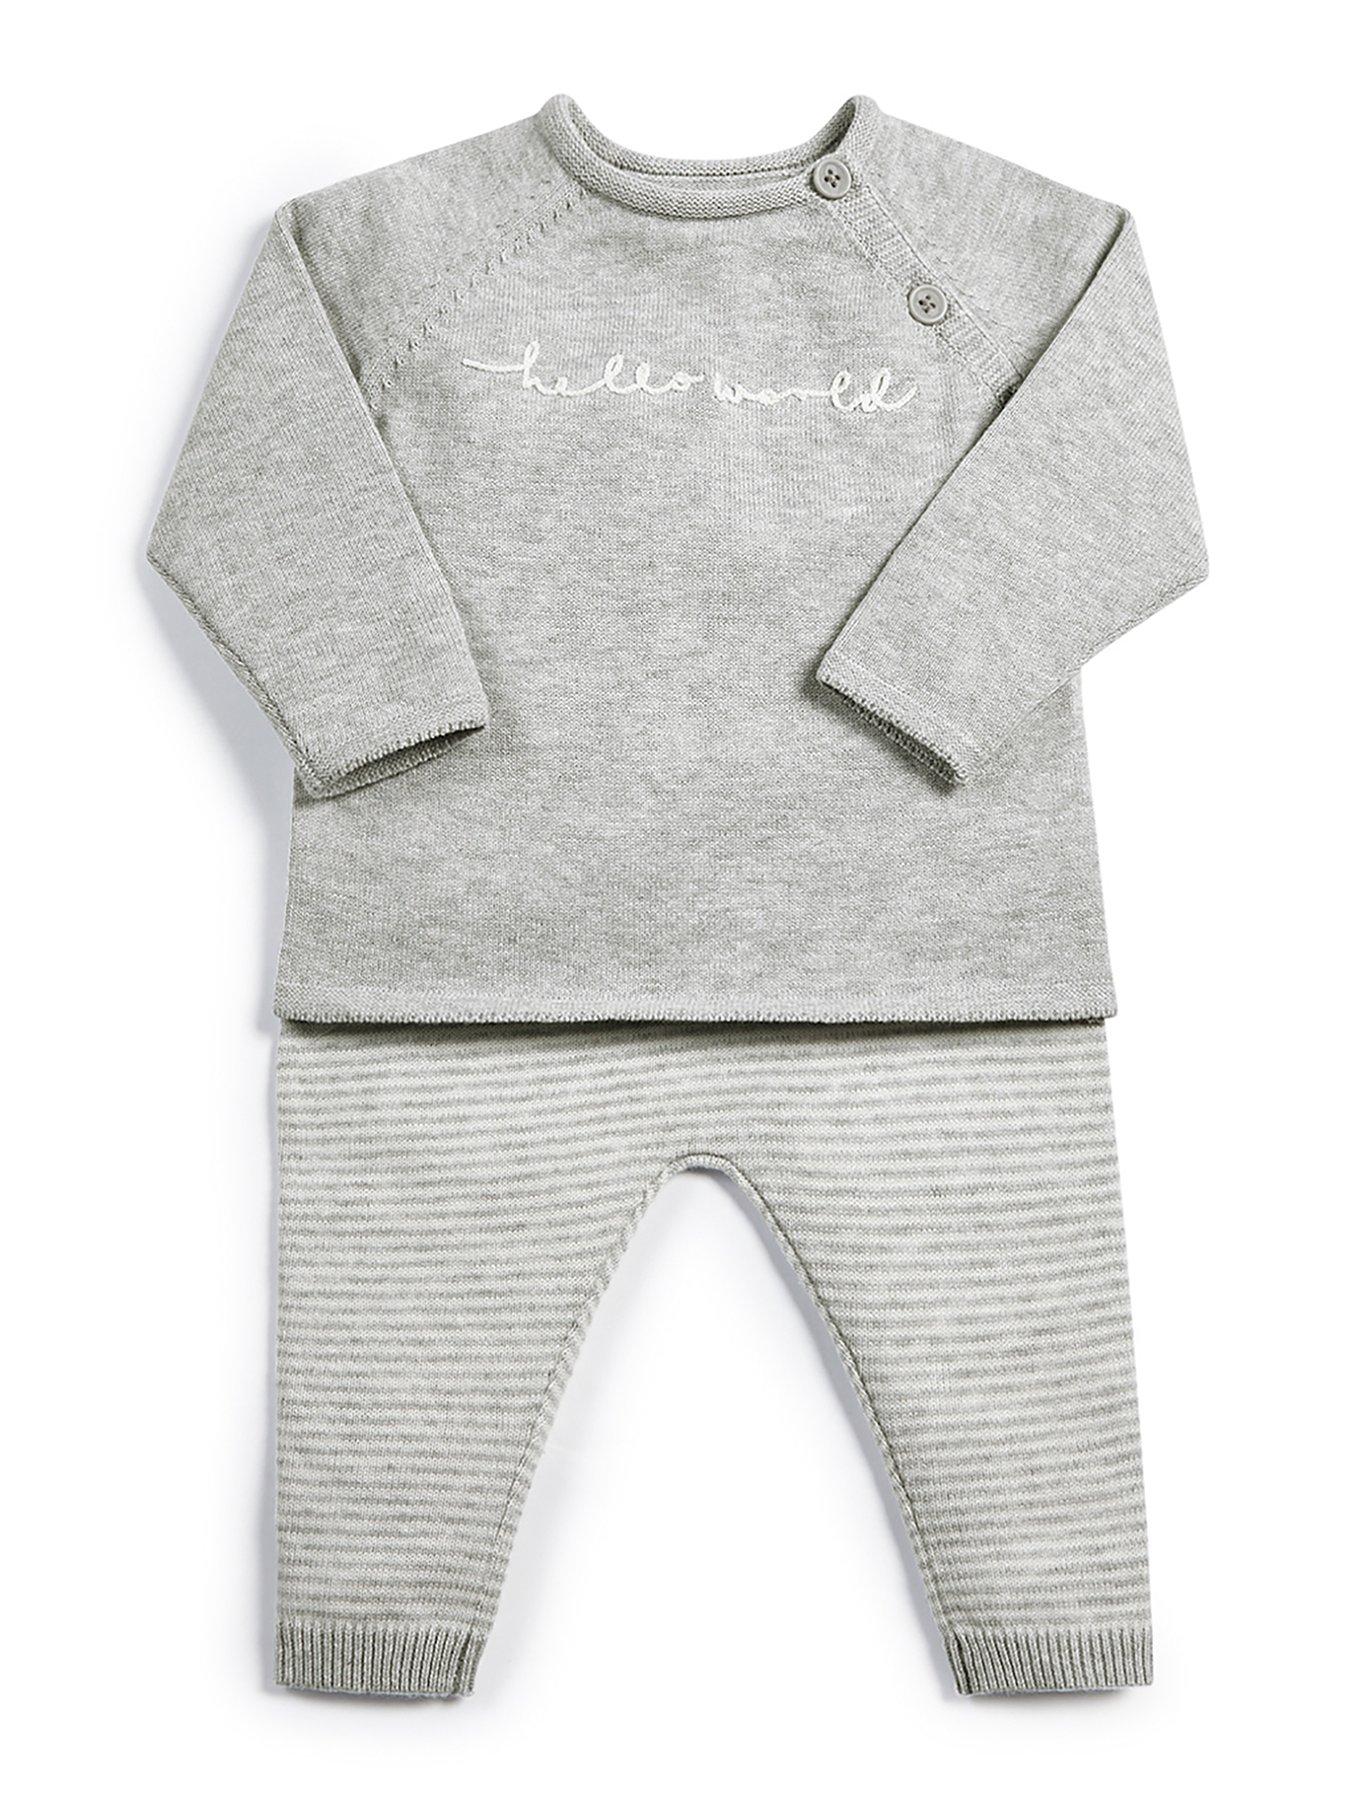 Baby Clothes Unisex Baby 2 Piece Knitted Set - Grey